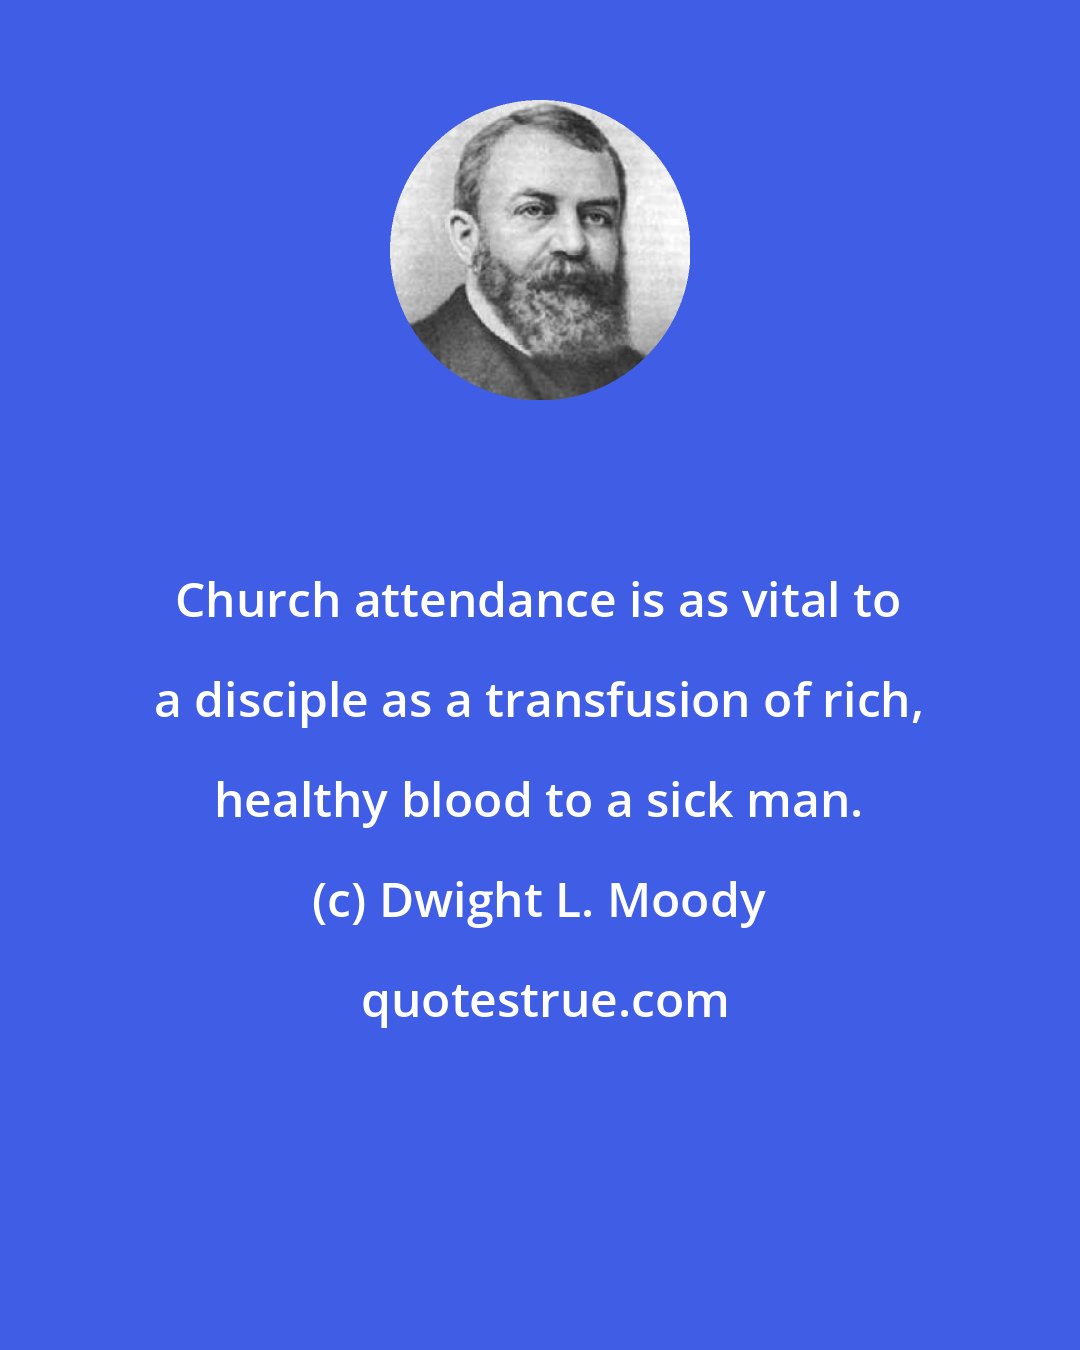 Dwight L. Moody: Church attendance is as vital to a disciple as a transfusion of rich, healthy blood to a sick man.